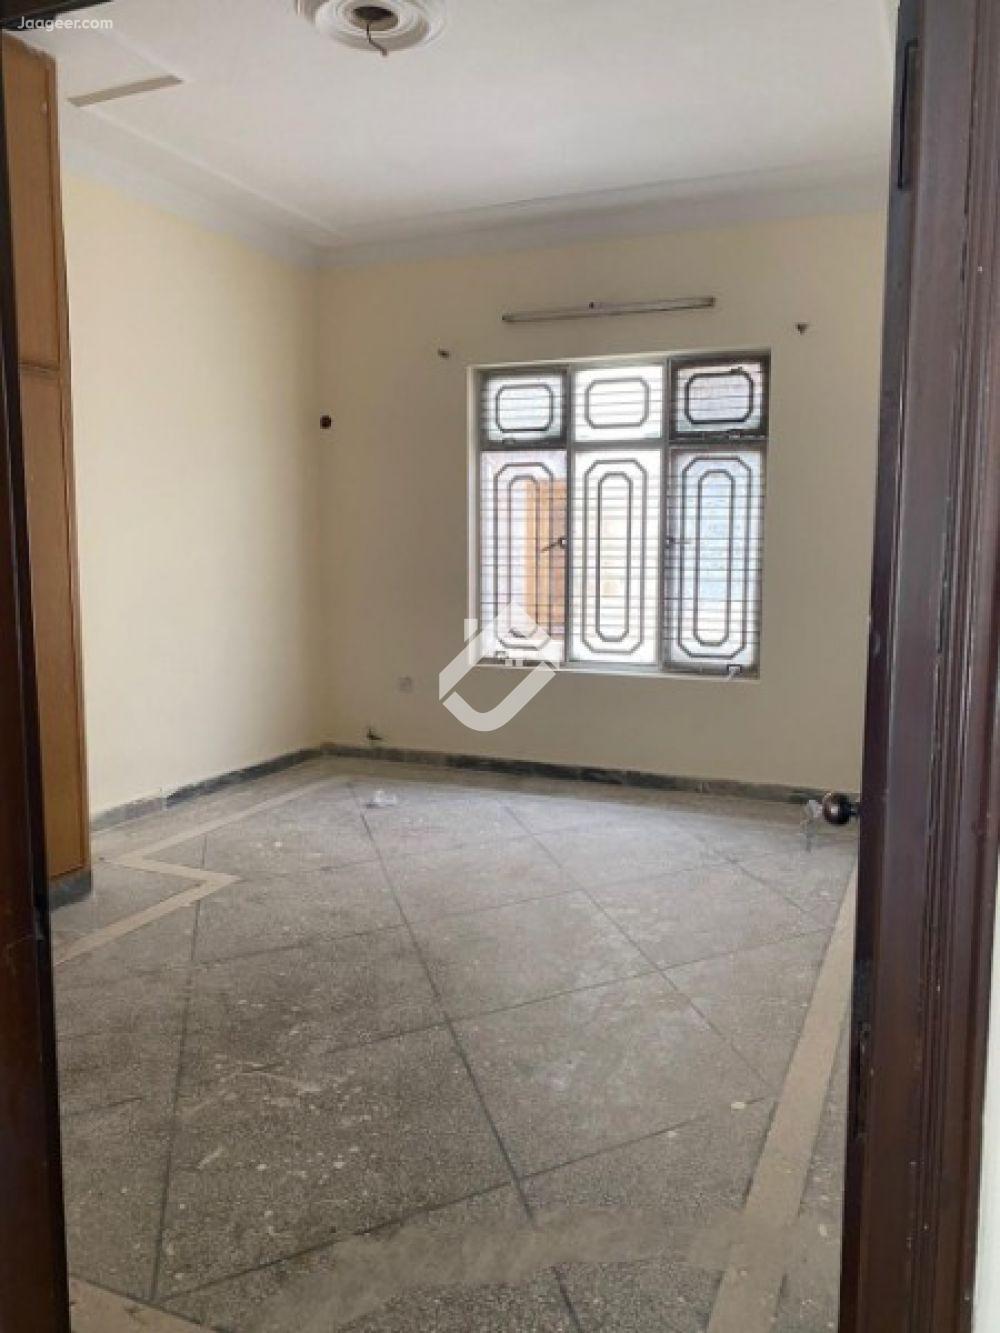 View  10 Marla Upper Portion House For Rent In Khayaban E Sadiq in Khayaban E Sadiq, Sargodha